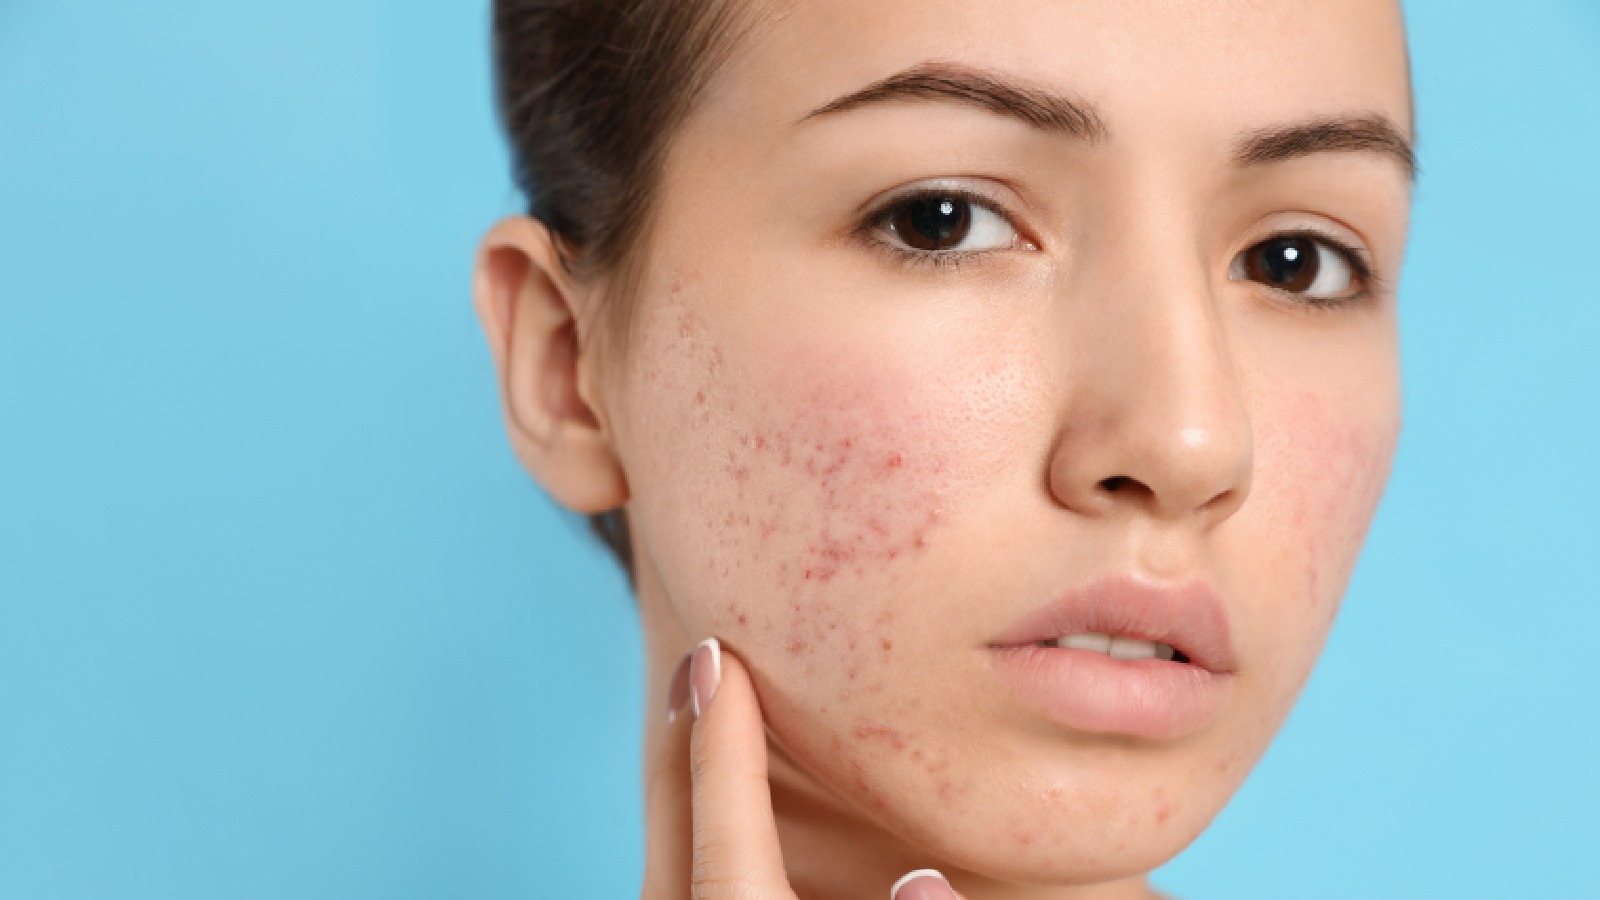 Estrogen also increases acne and other skin problems. Know how to fix them.